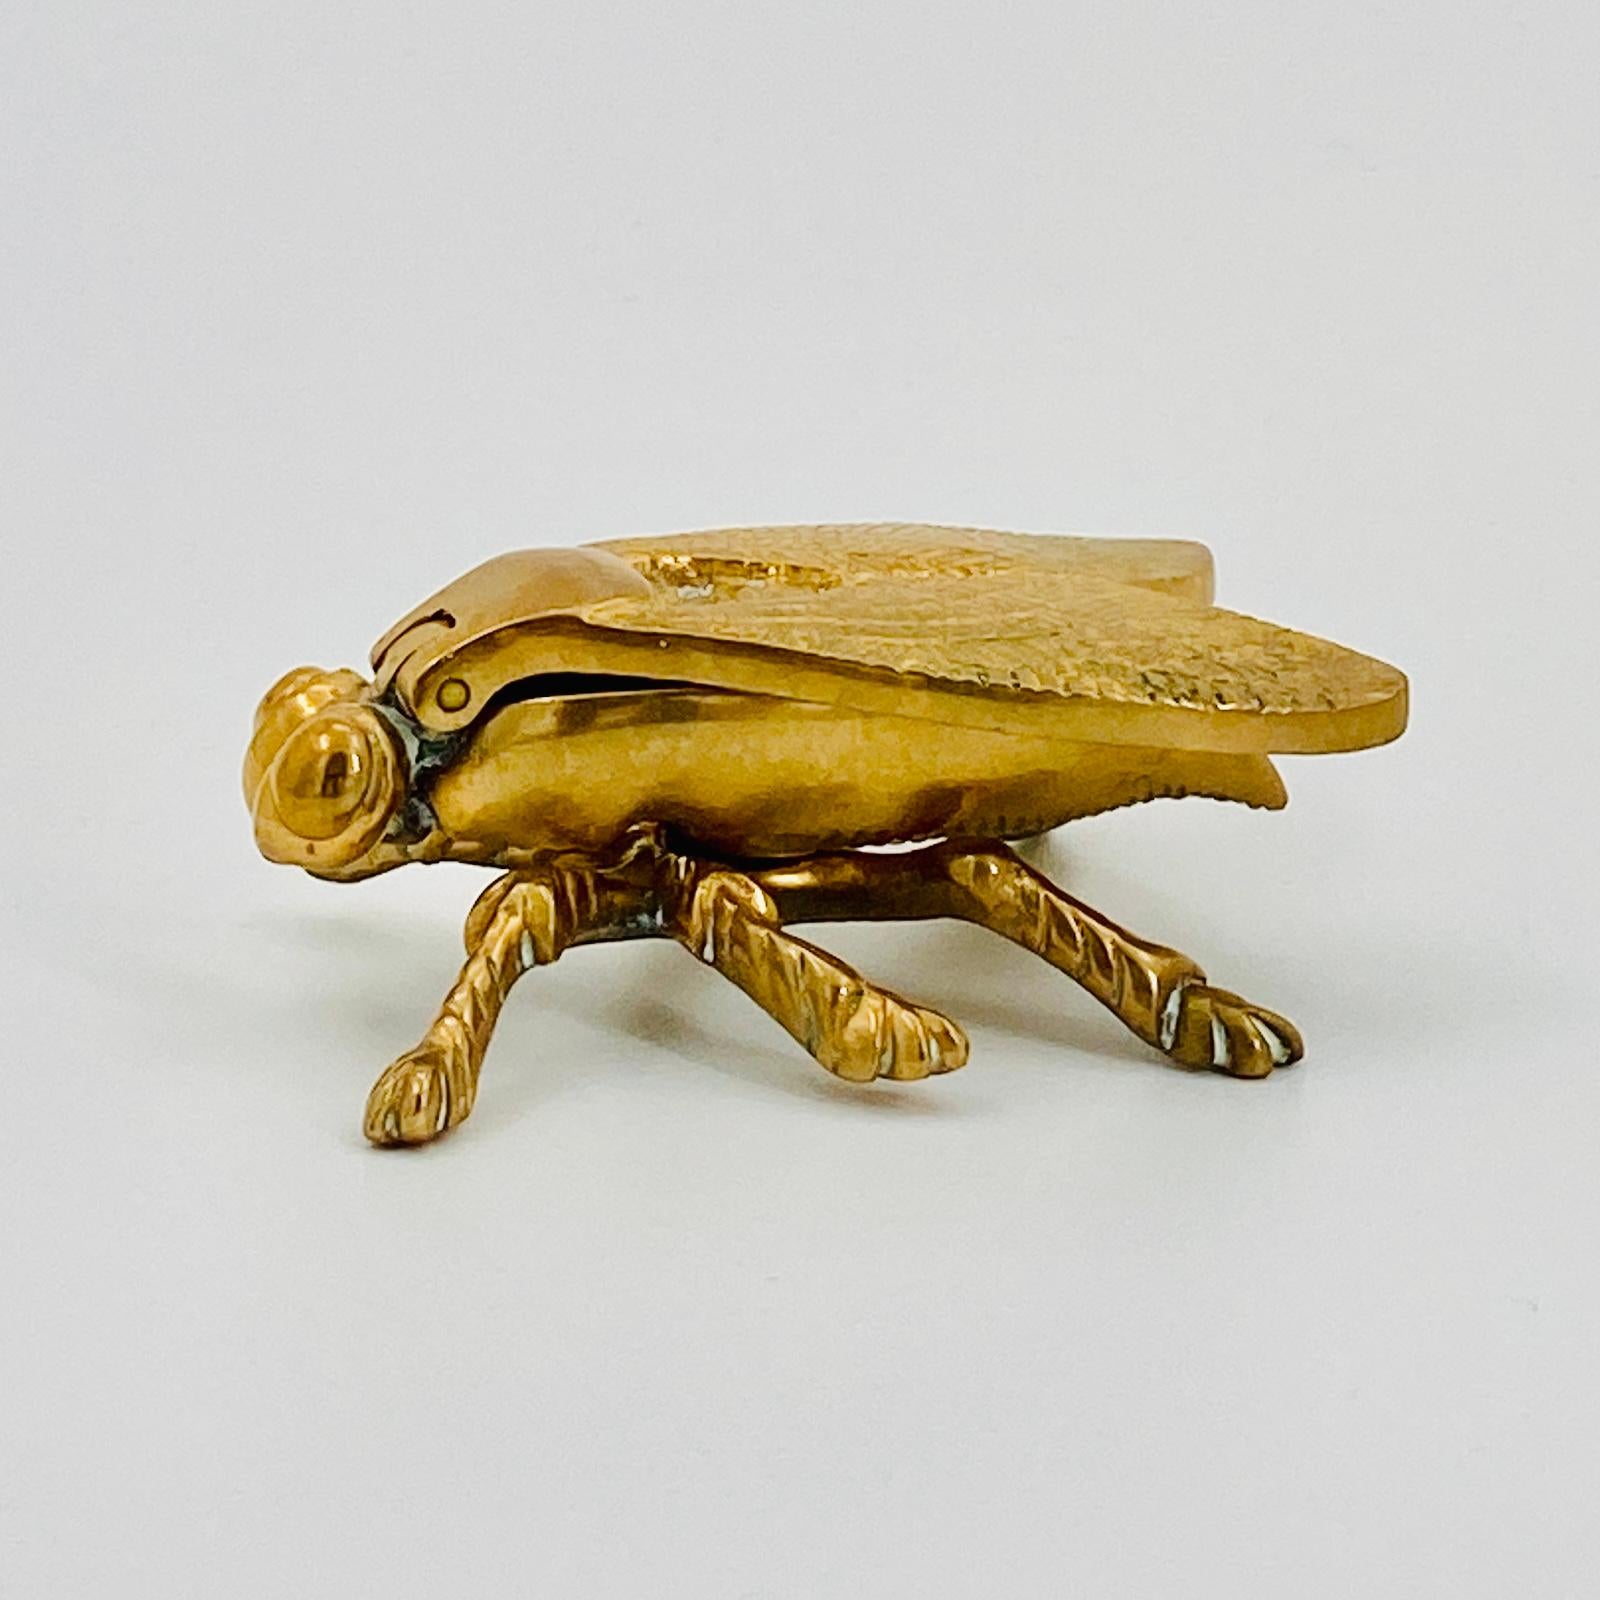 Small Danish brass bee box.
The wings of the bee opens upwards that gives access to a small 